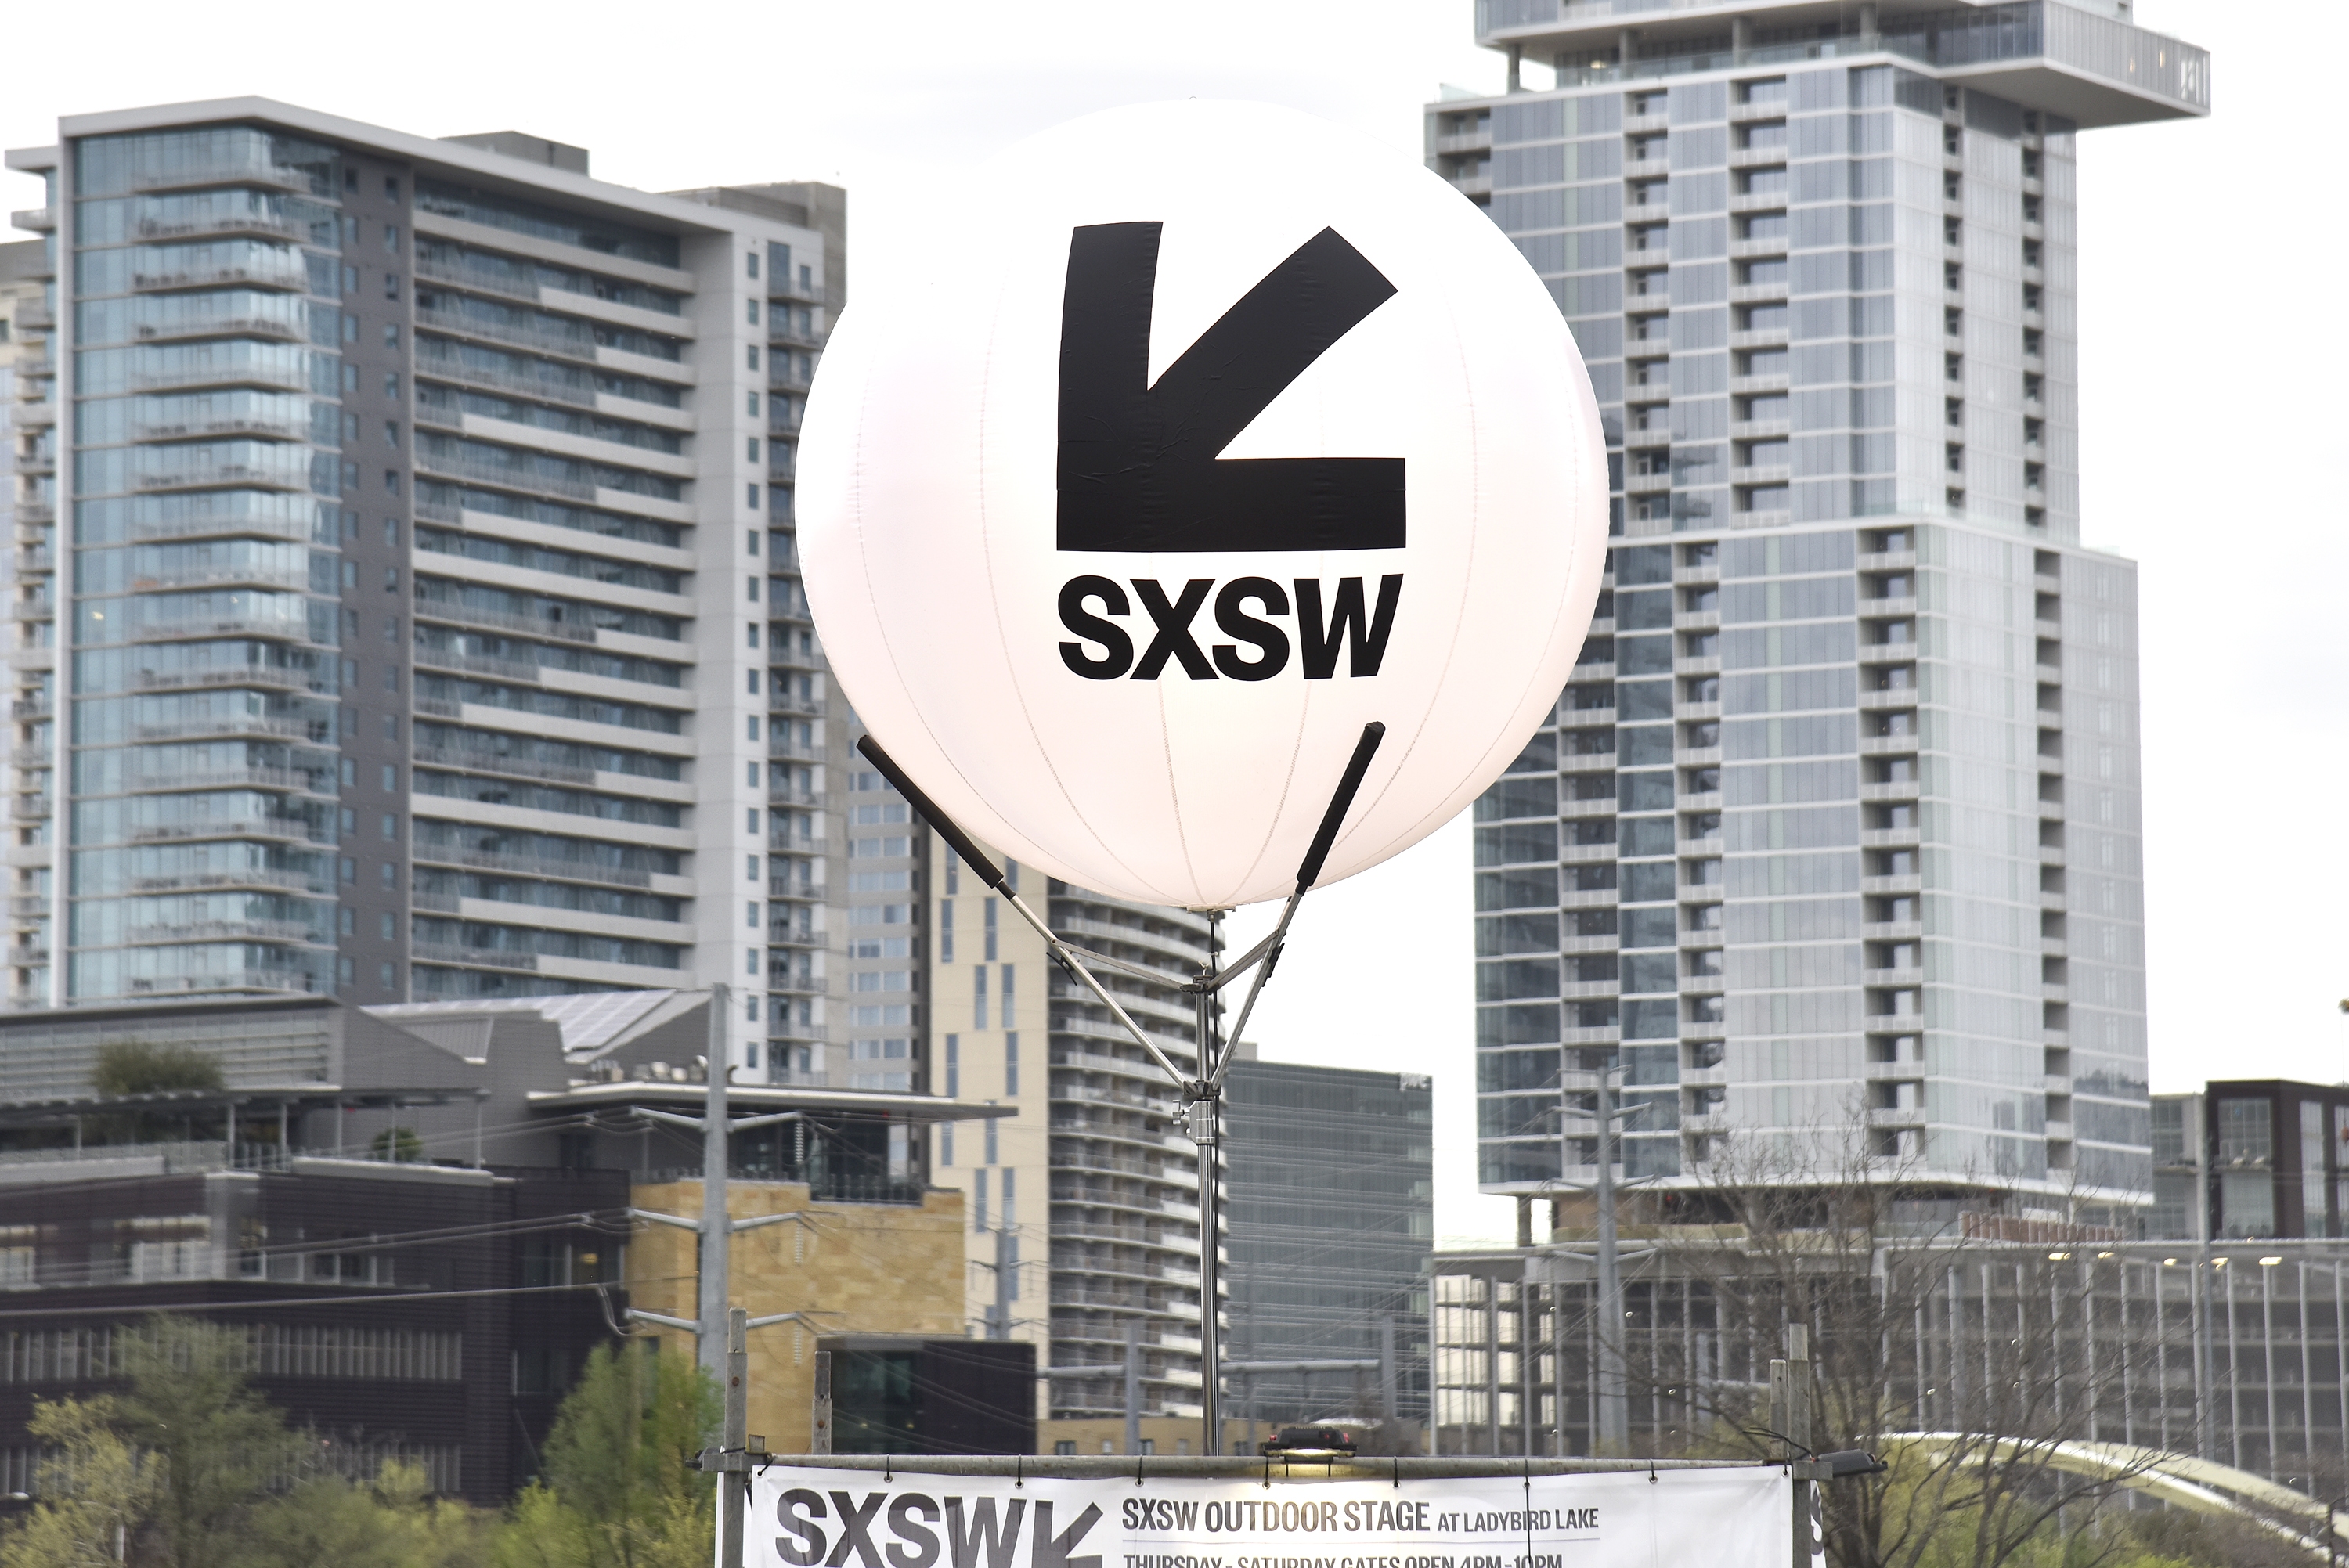 A large white balloon with an arrow pointing to the bottom left and words reading SXSW in front of a city skyline.